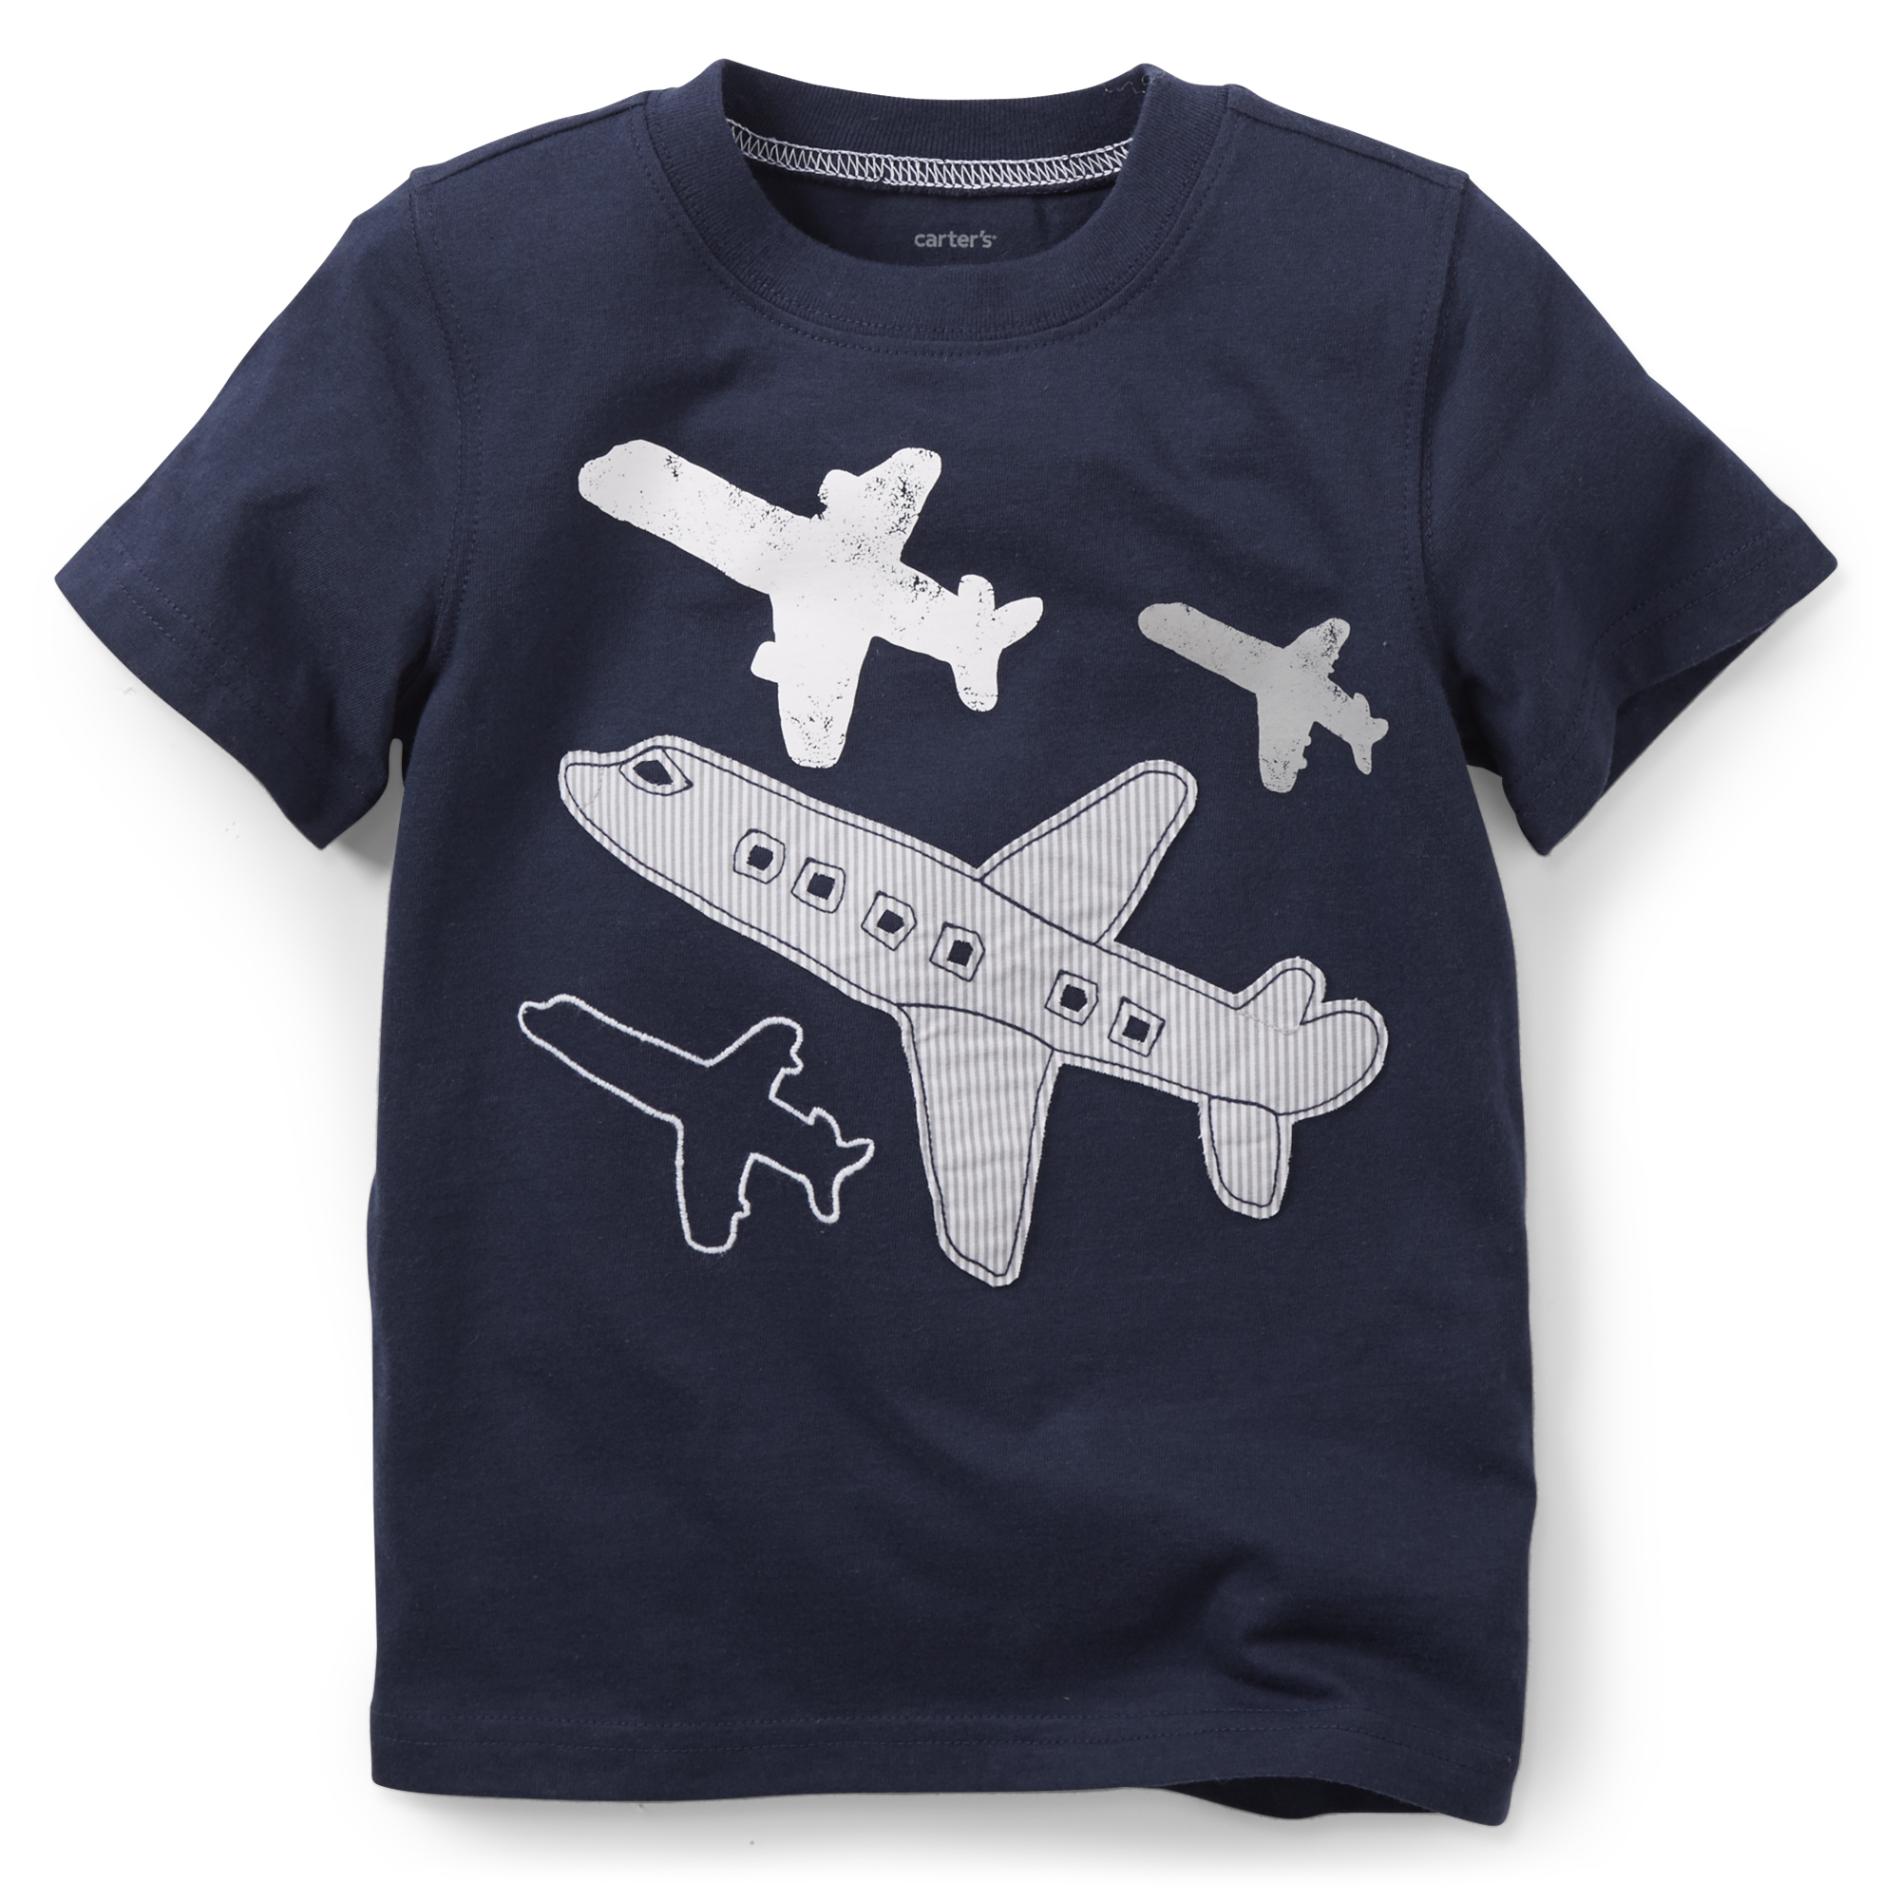 Carter's Boy's Graphic T-Shirt - Airplanes